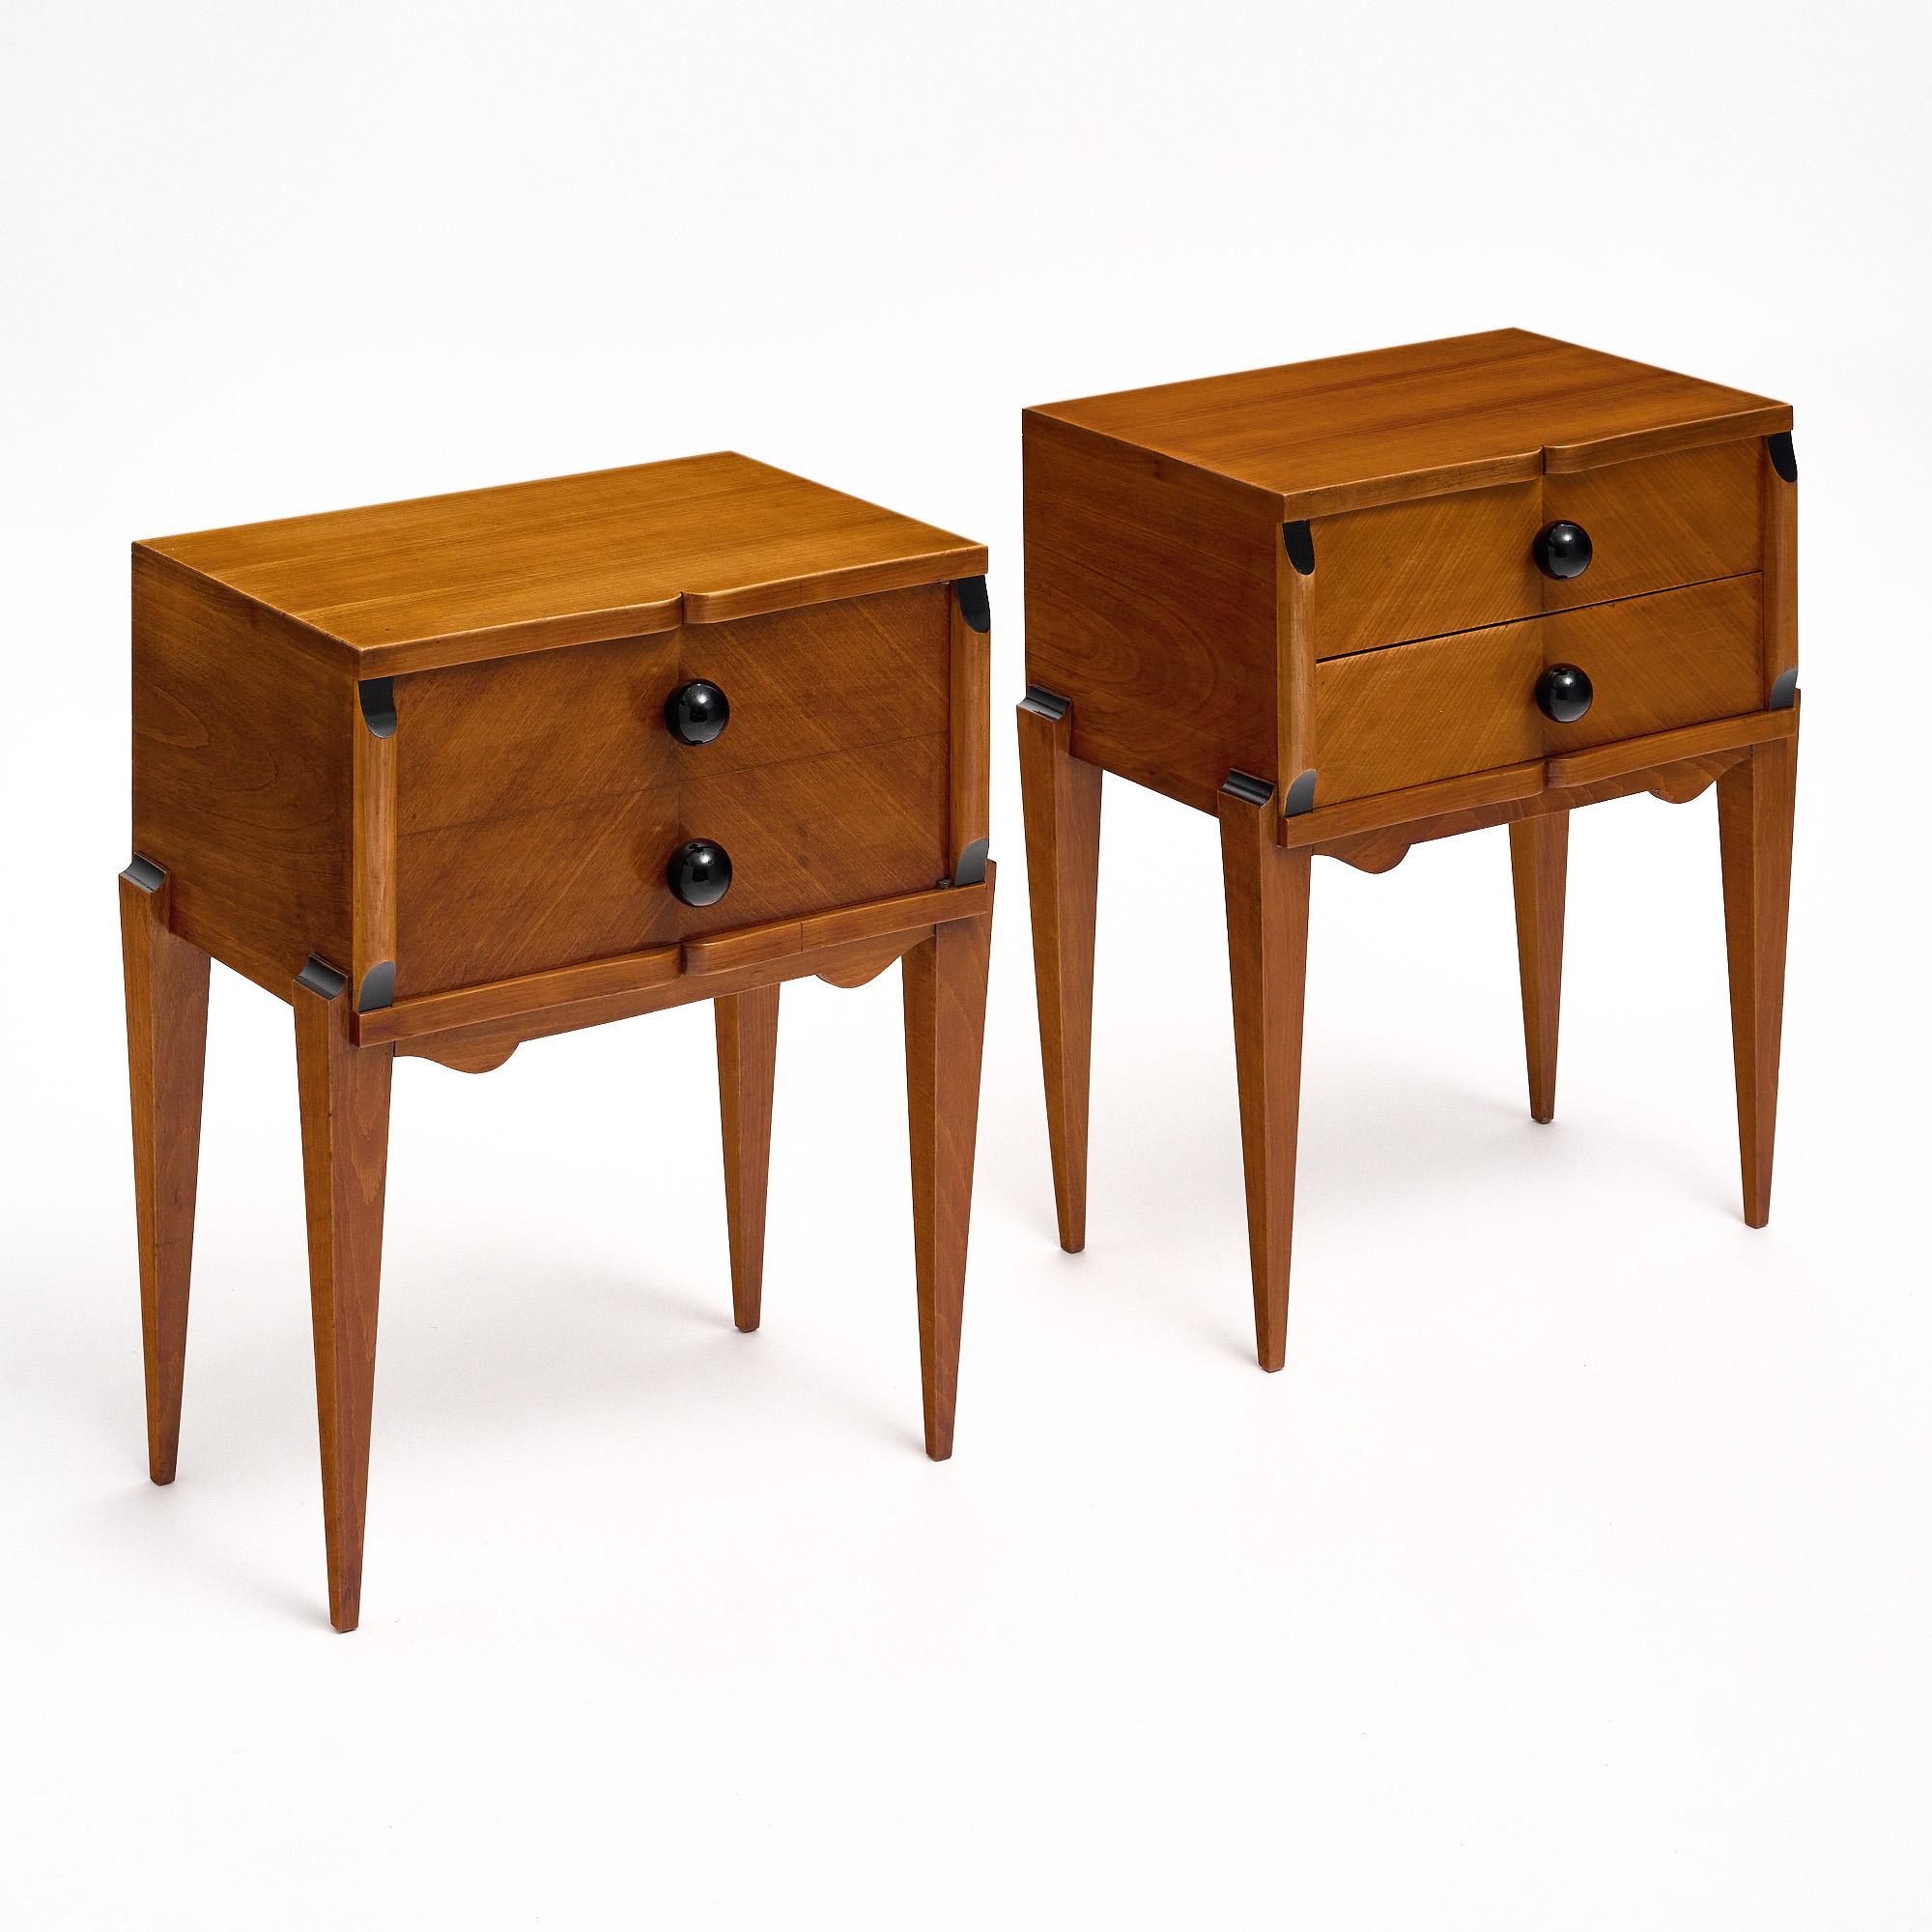 Side tables from the Art Deco period in France. This striking pair is made of rosewood and features the stylized curves and tapered legs and details iconic to the Art Deco period. Each table has two dovetailed drawers that feature black Murano glass